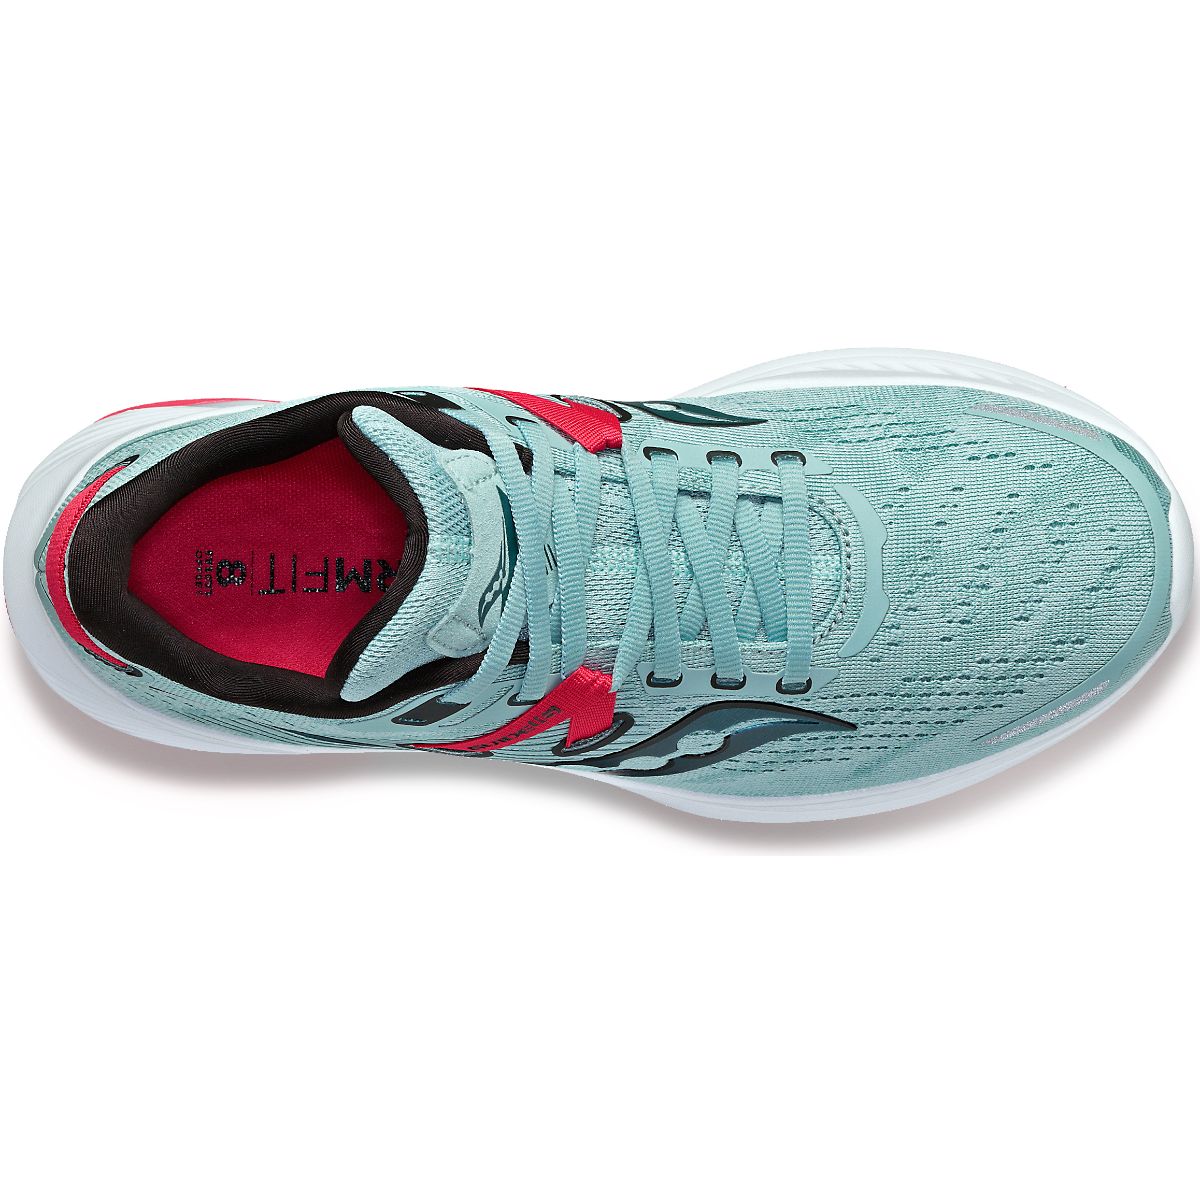 Guide 16 (Womens) - Mineral/Rose - RunActive